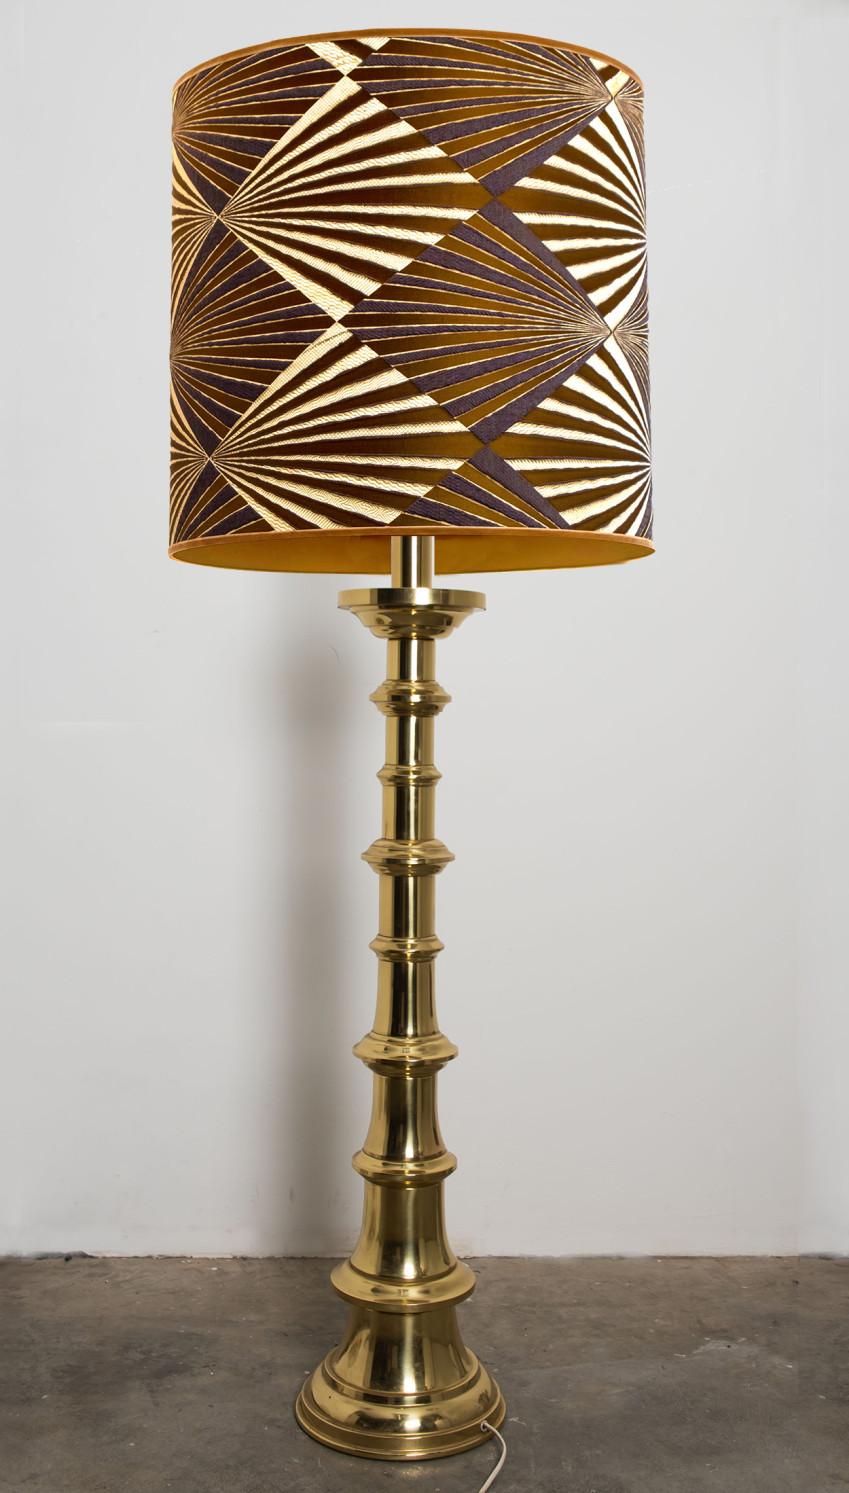 Exceptional ceramic XL bubble floor lamp by Kaiser, Europe, Germany, 1960s. Beautiful sculptural piece handmade ceramic in rich glazed brown tones. With special new custom made  silk lamp shade by Dedar. With warm bronze/gold inner shades,